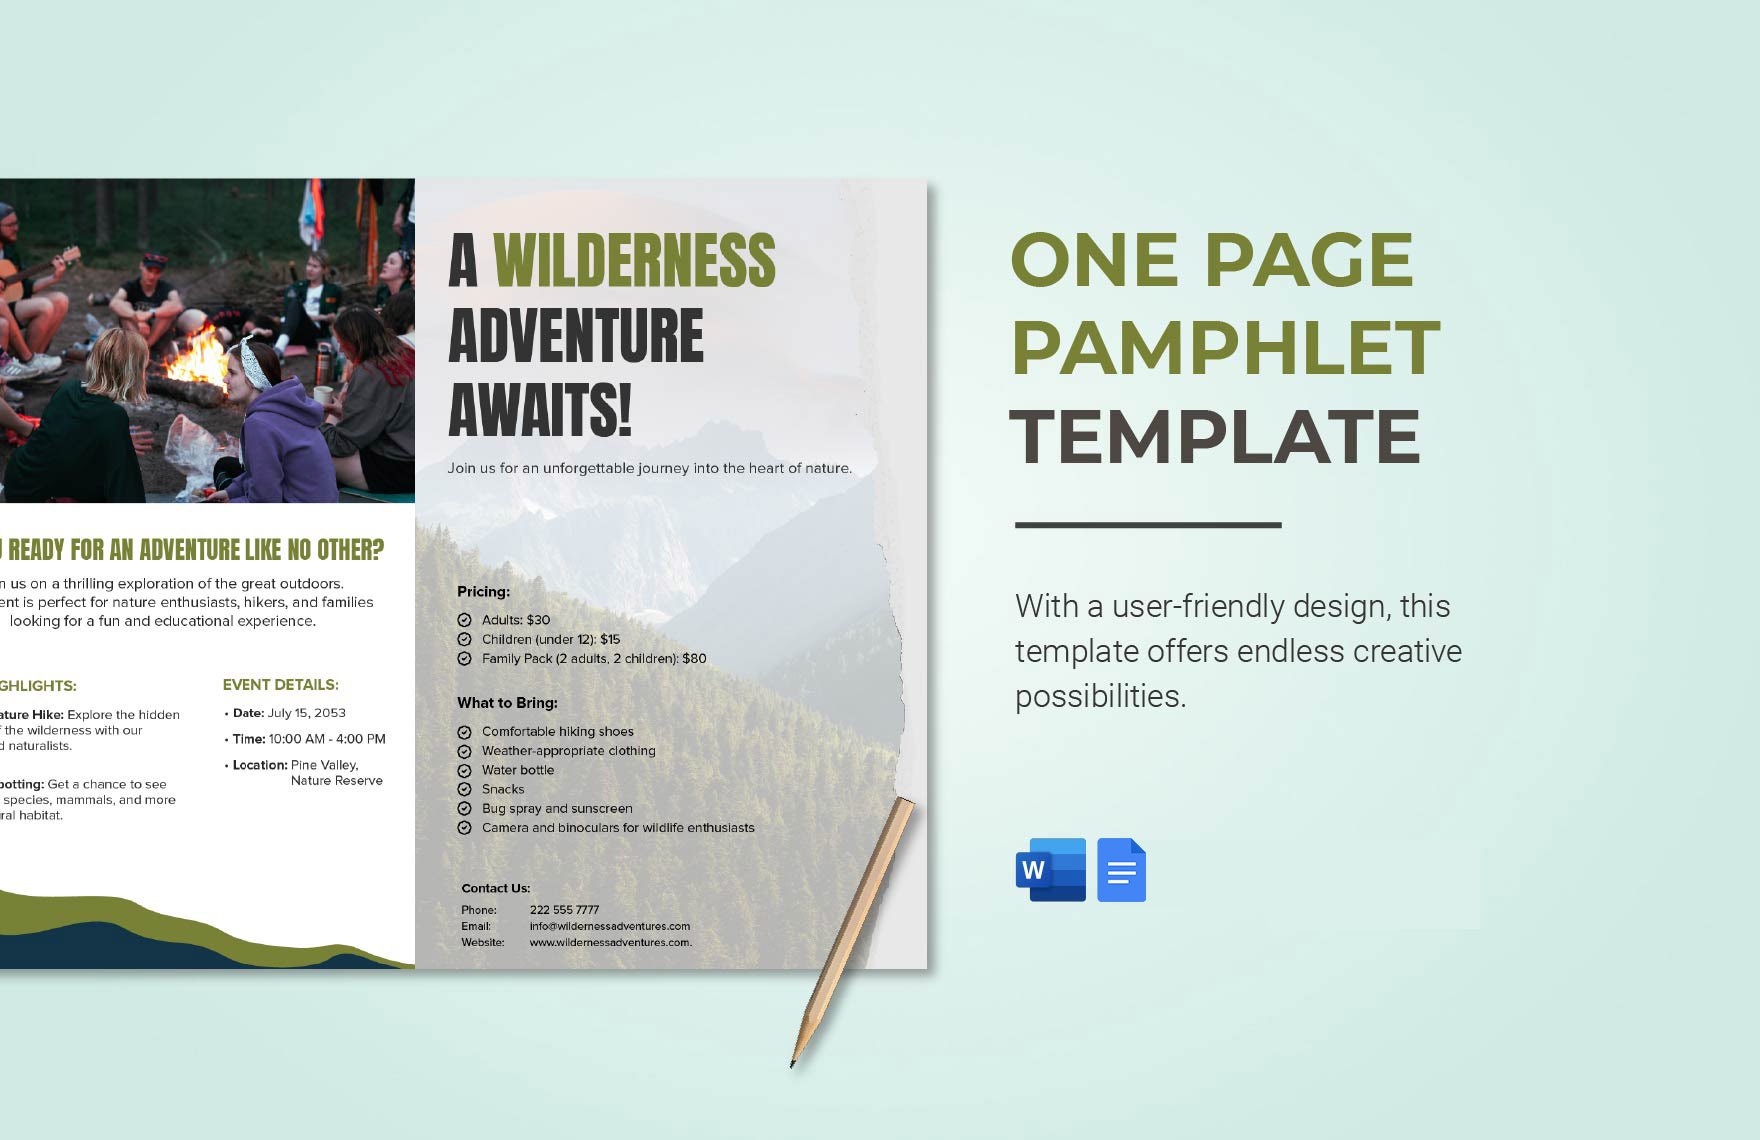 One Page Pamphlet Template